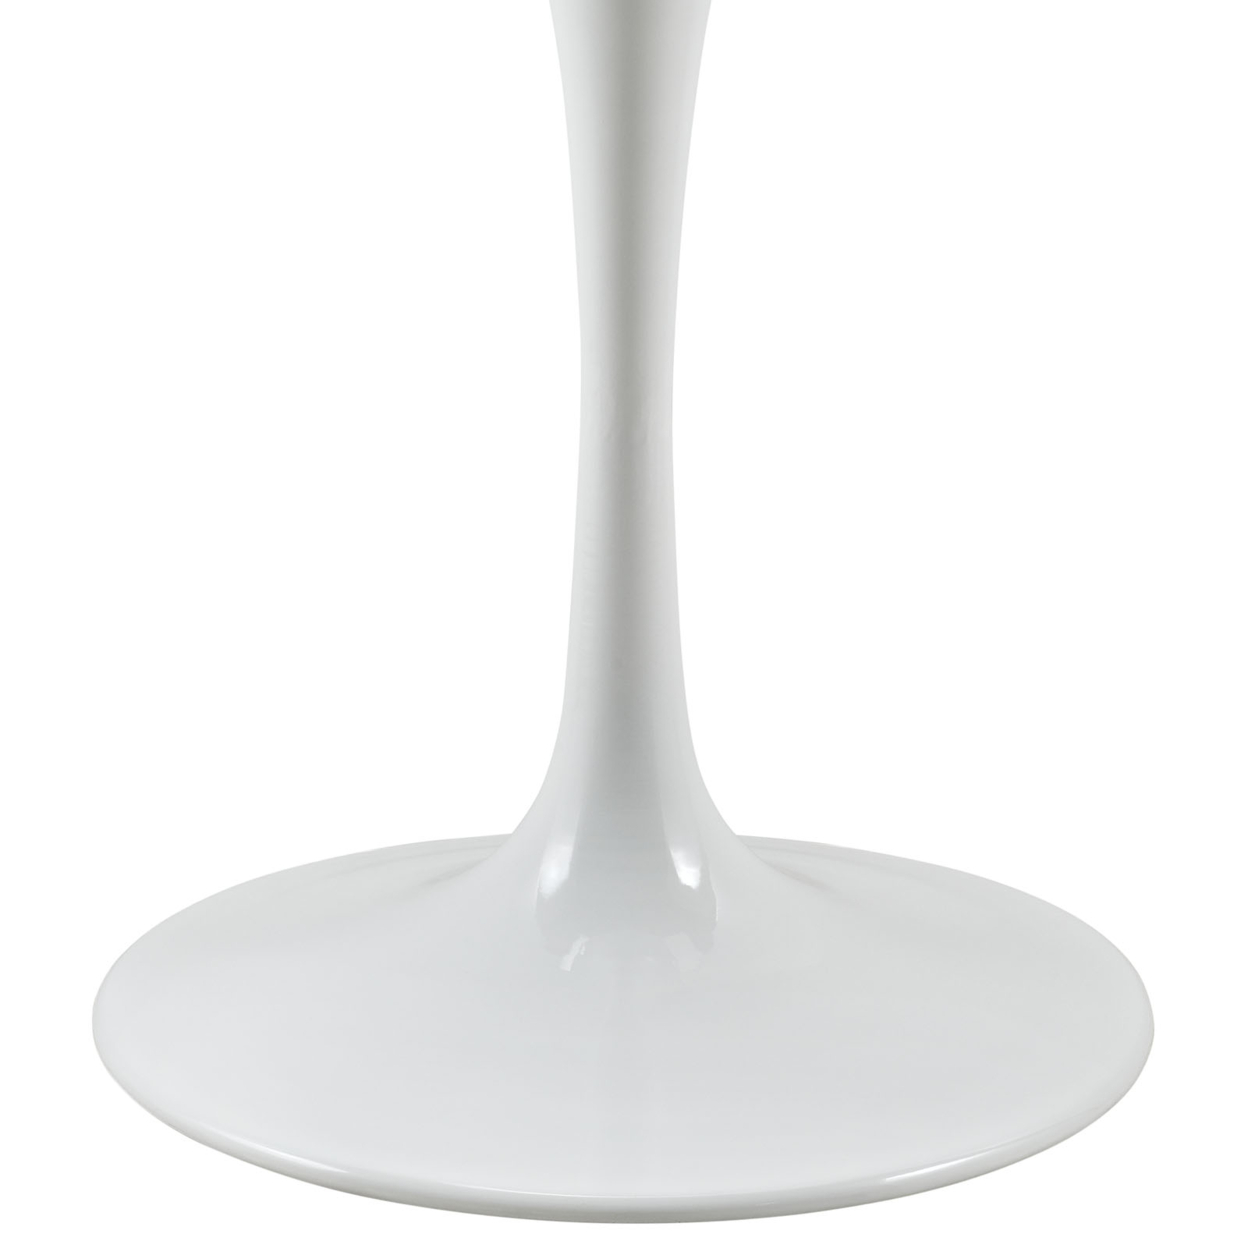 White Lippa 36 Wood Top Dining Table